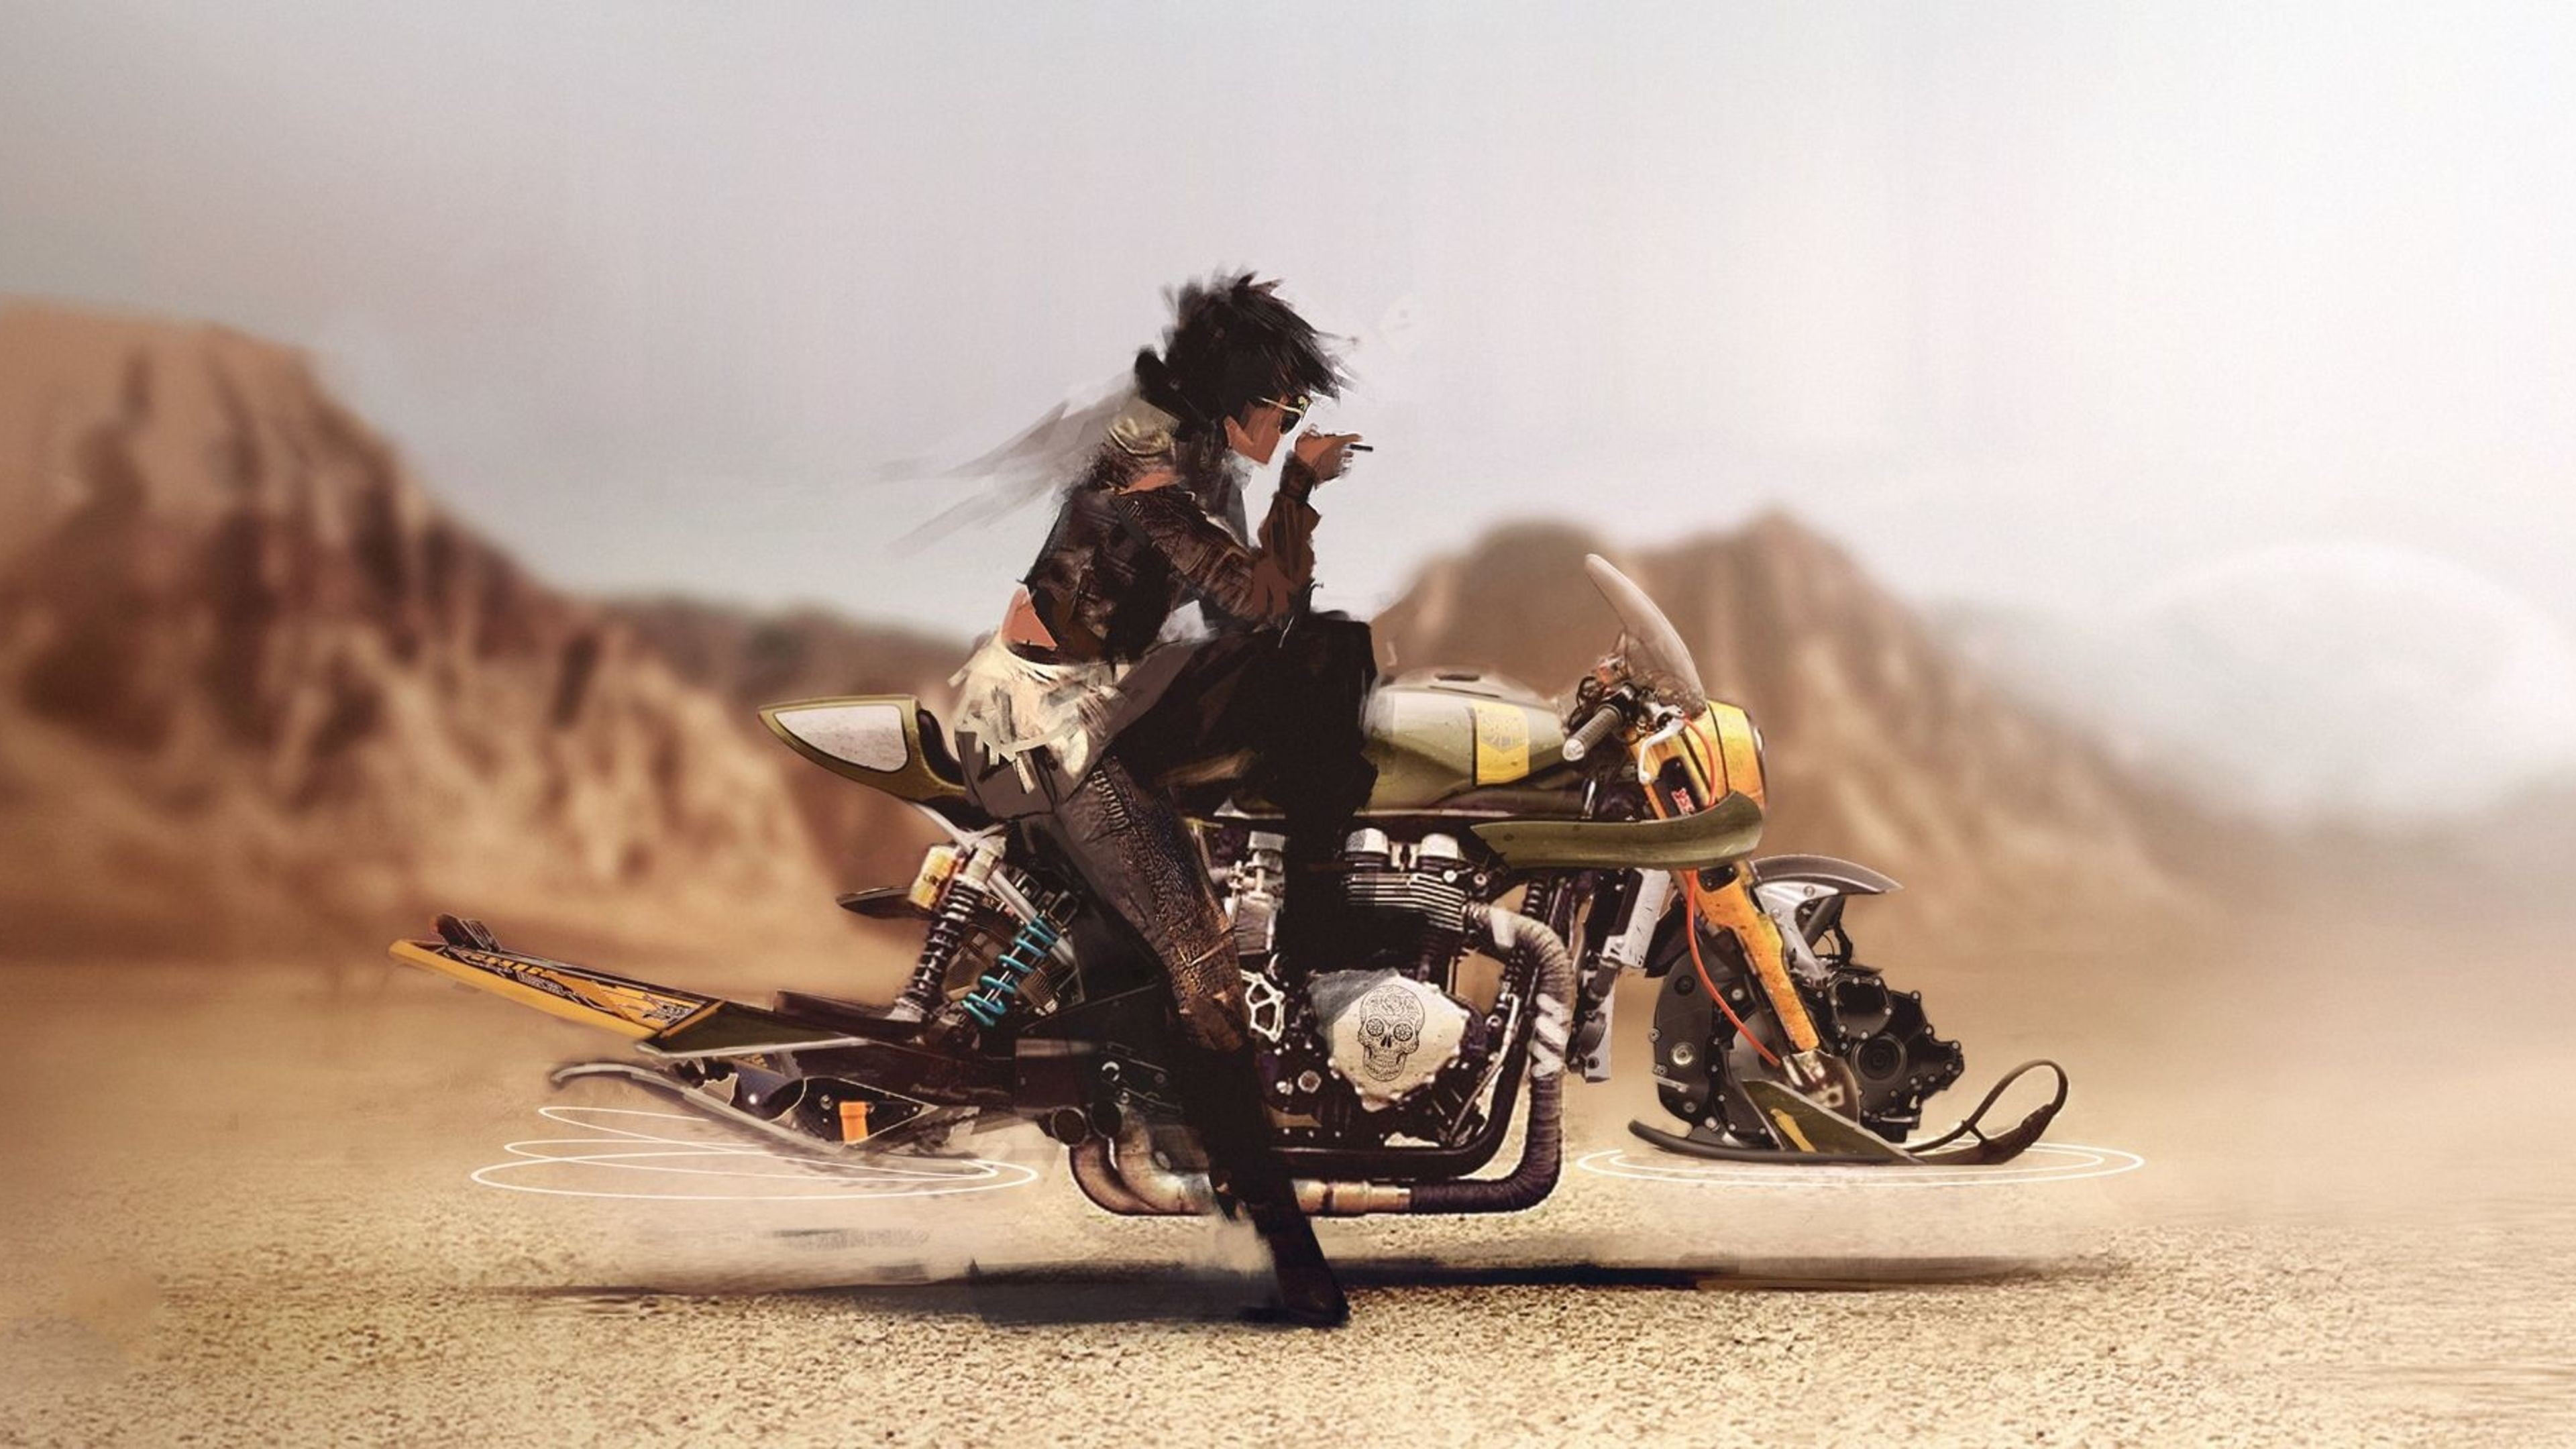 Beyond Good and Evil (Game): A male game character riding a floating motorcycle, A 2003 action-adventure, stealth game. 3840x2160 4K Background.